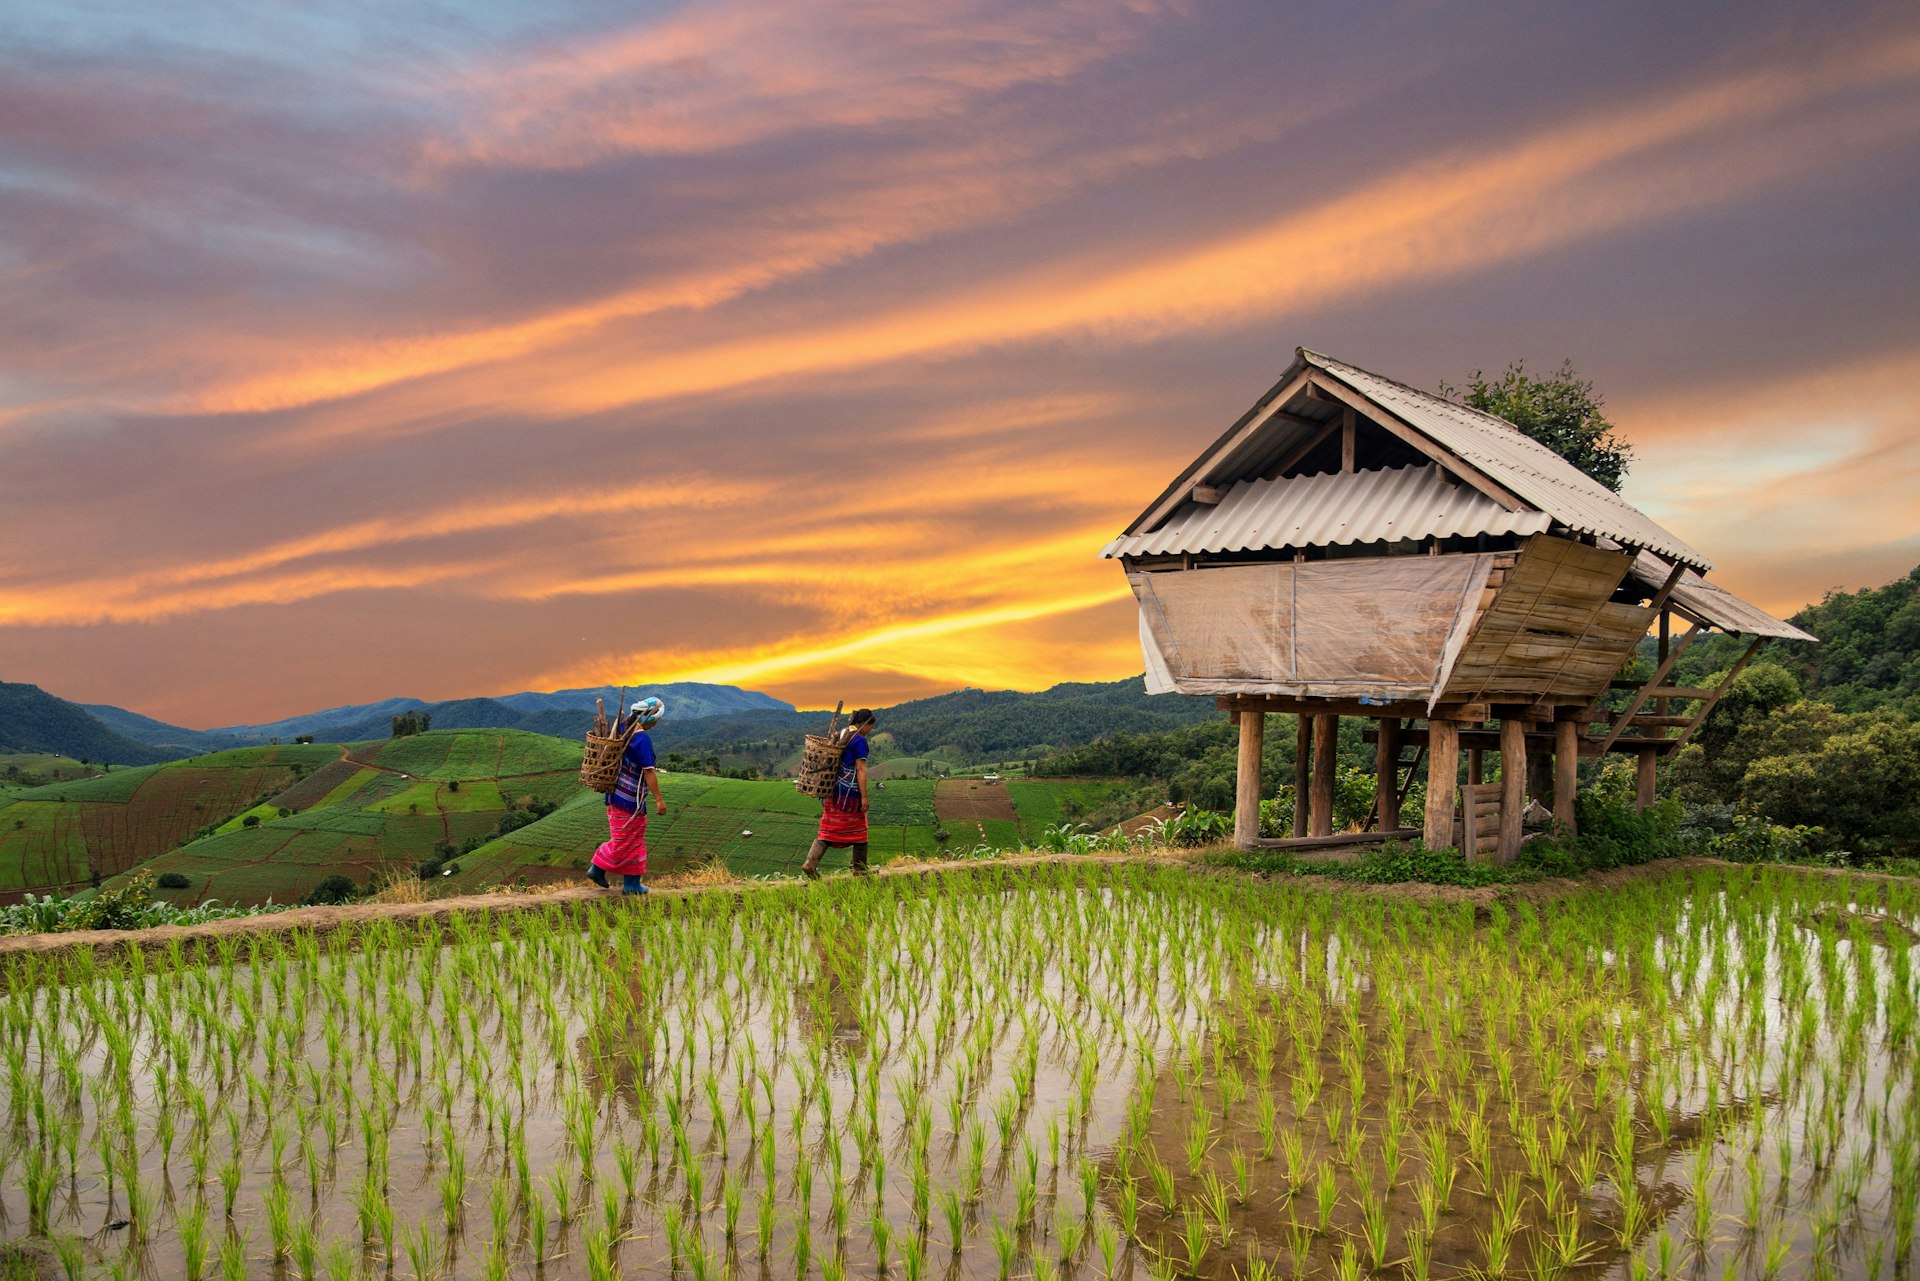 A rice paddy filled with water with green shoots bursting through the surface. Two people in clothes of the Hmong tribe carrying bundles of sticks on their backs walk towards a wooden house on stilts. 